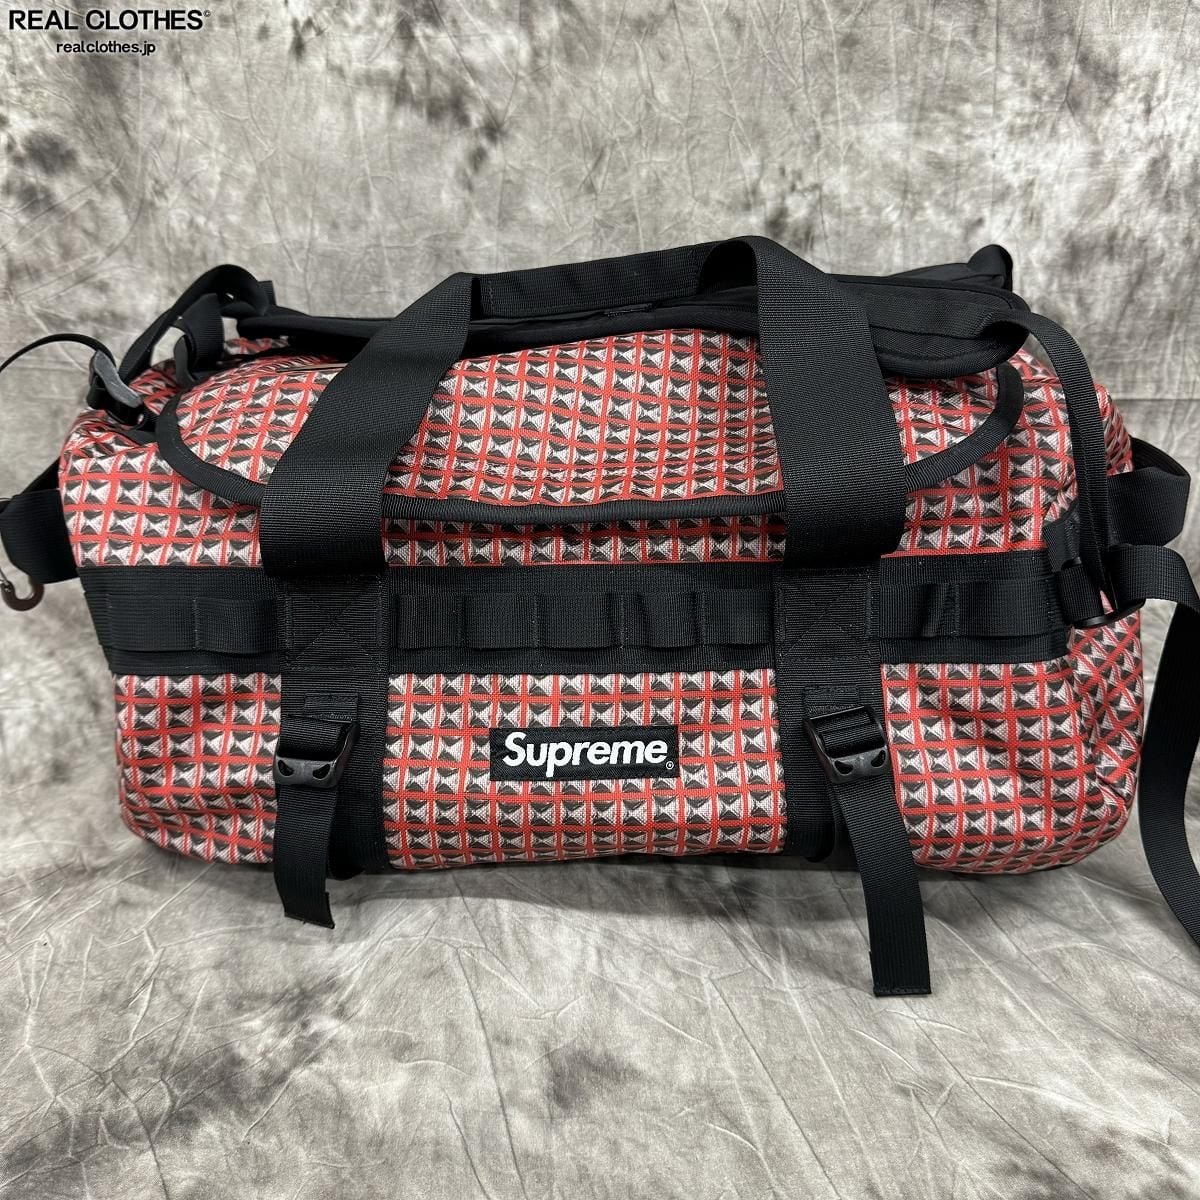 Supreme×THE NORTH FACE/シュプリーム×ノースフェイス【21SS】Studded Small Base Camp Duffle  Bag/ダッフルバッグ 42L